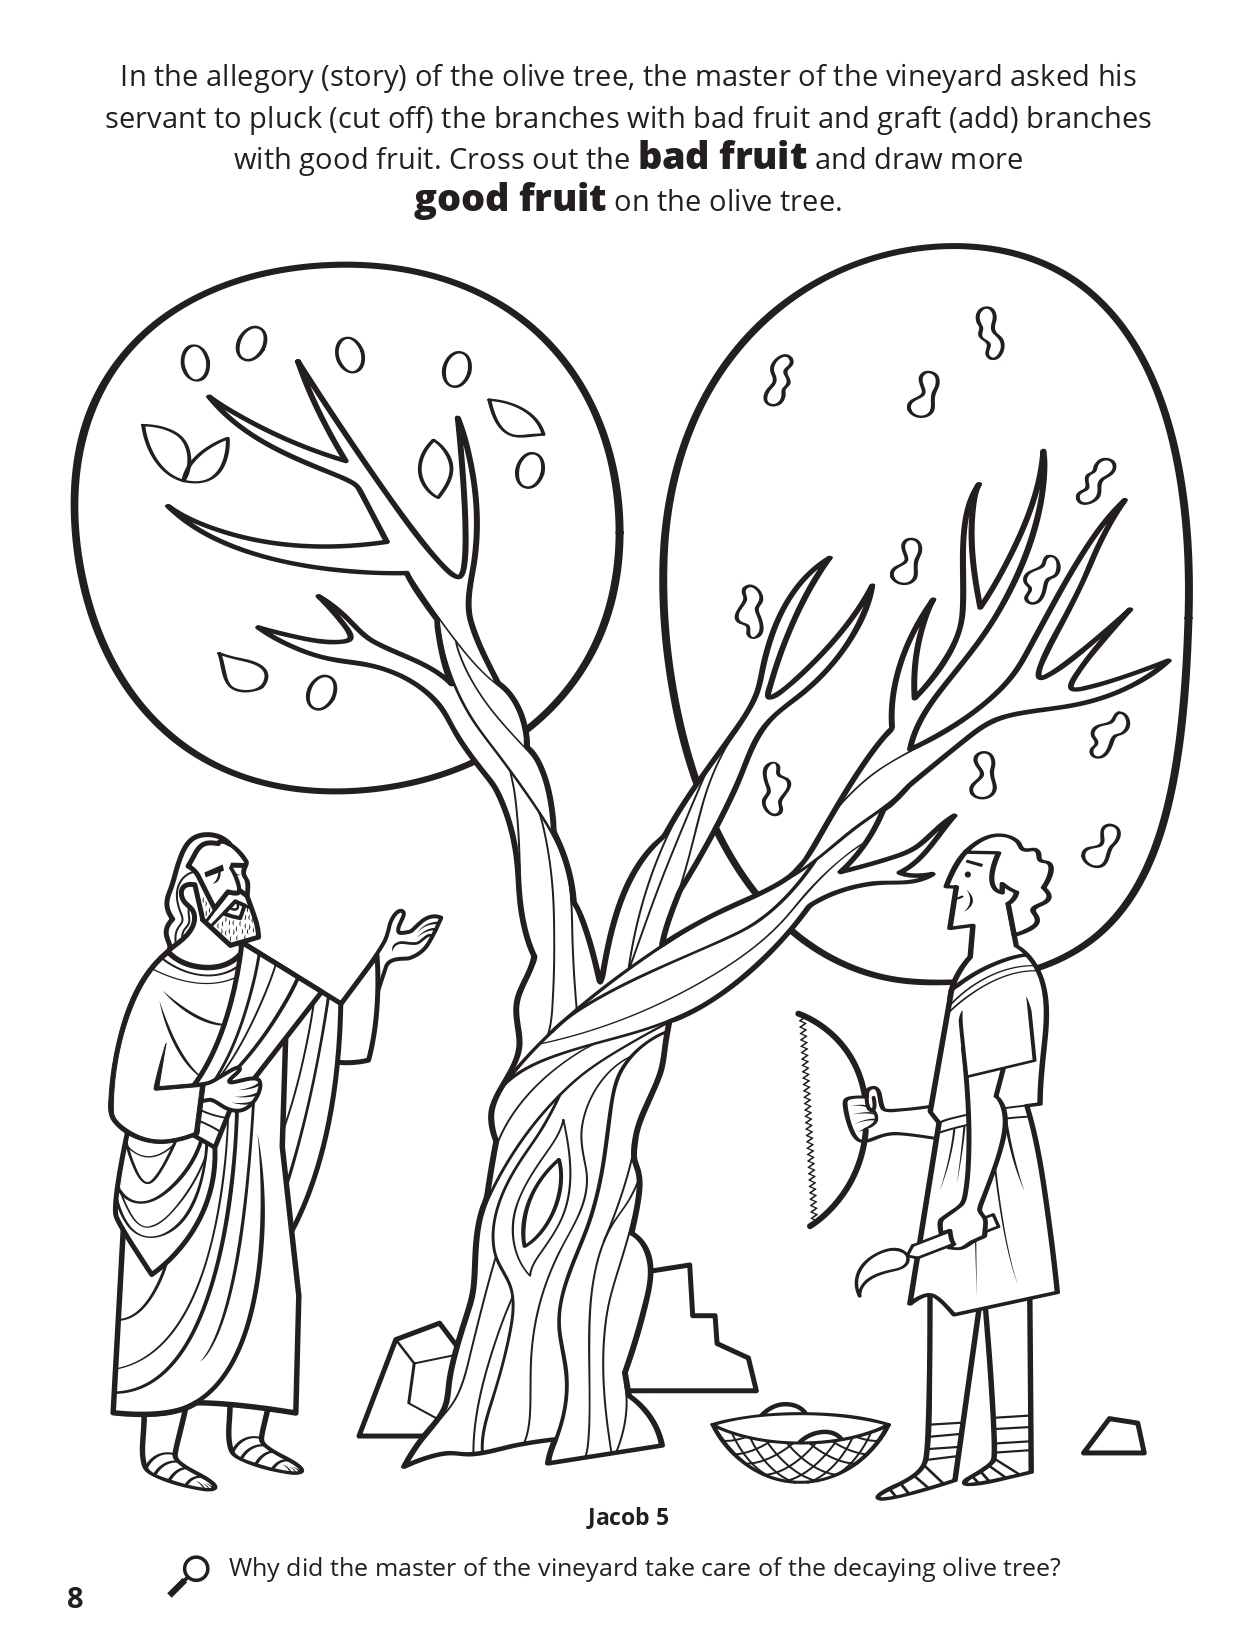 Cross Out The Bad Fruit And Draw More Good Fruit On The Olive Tree